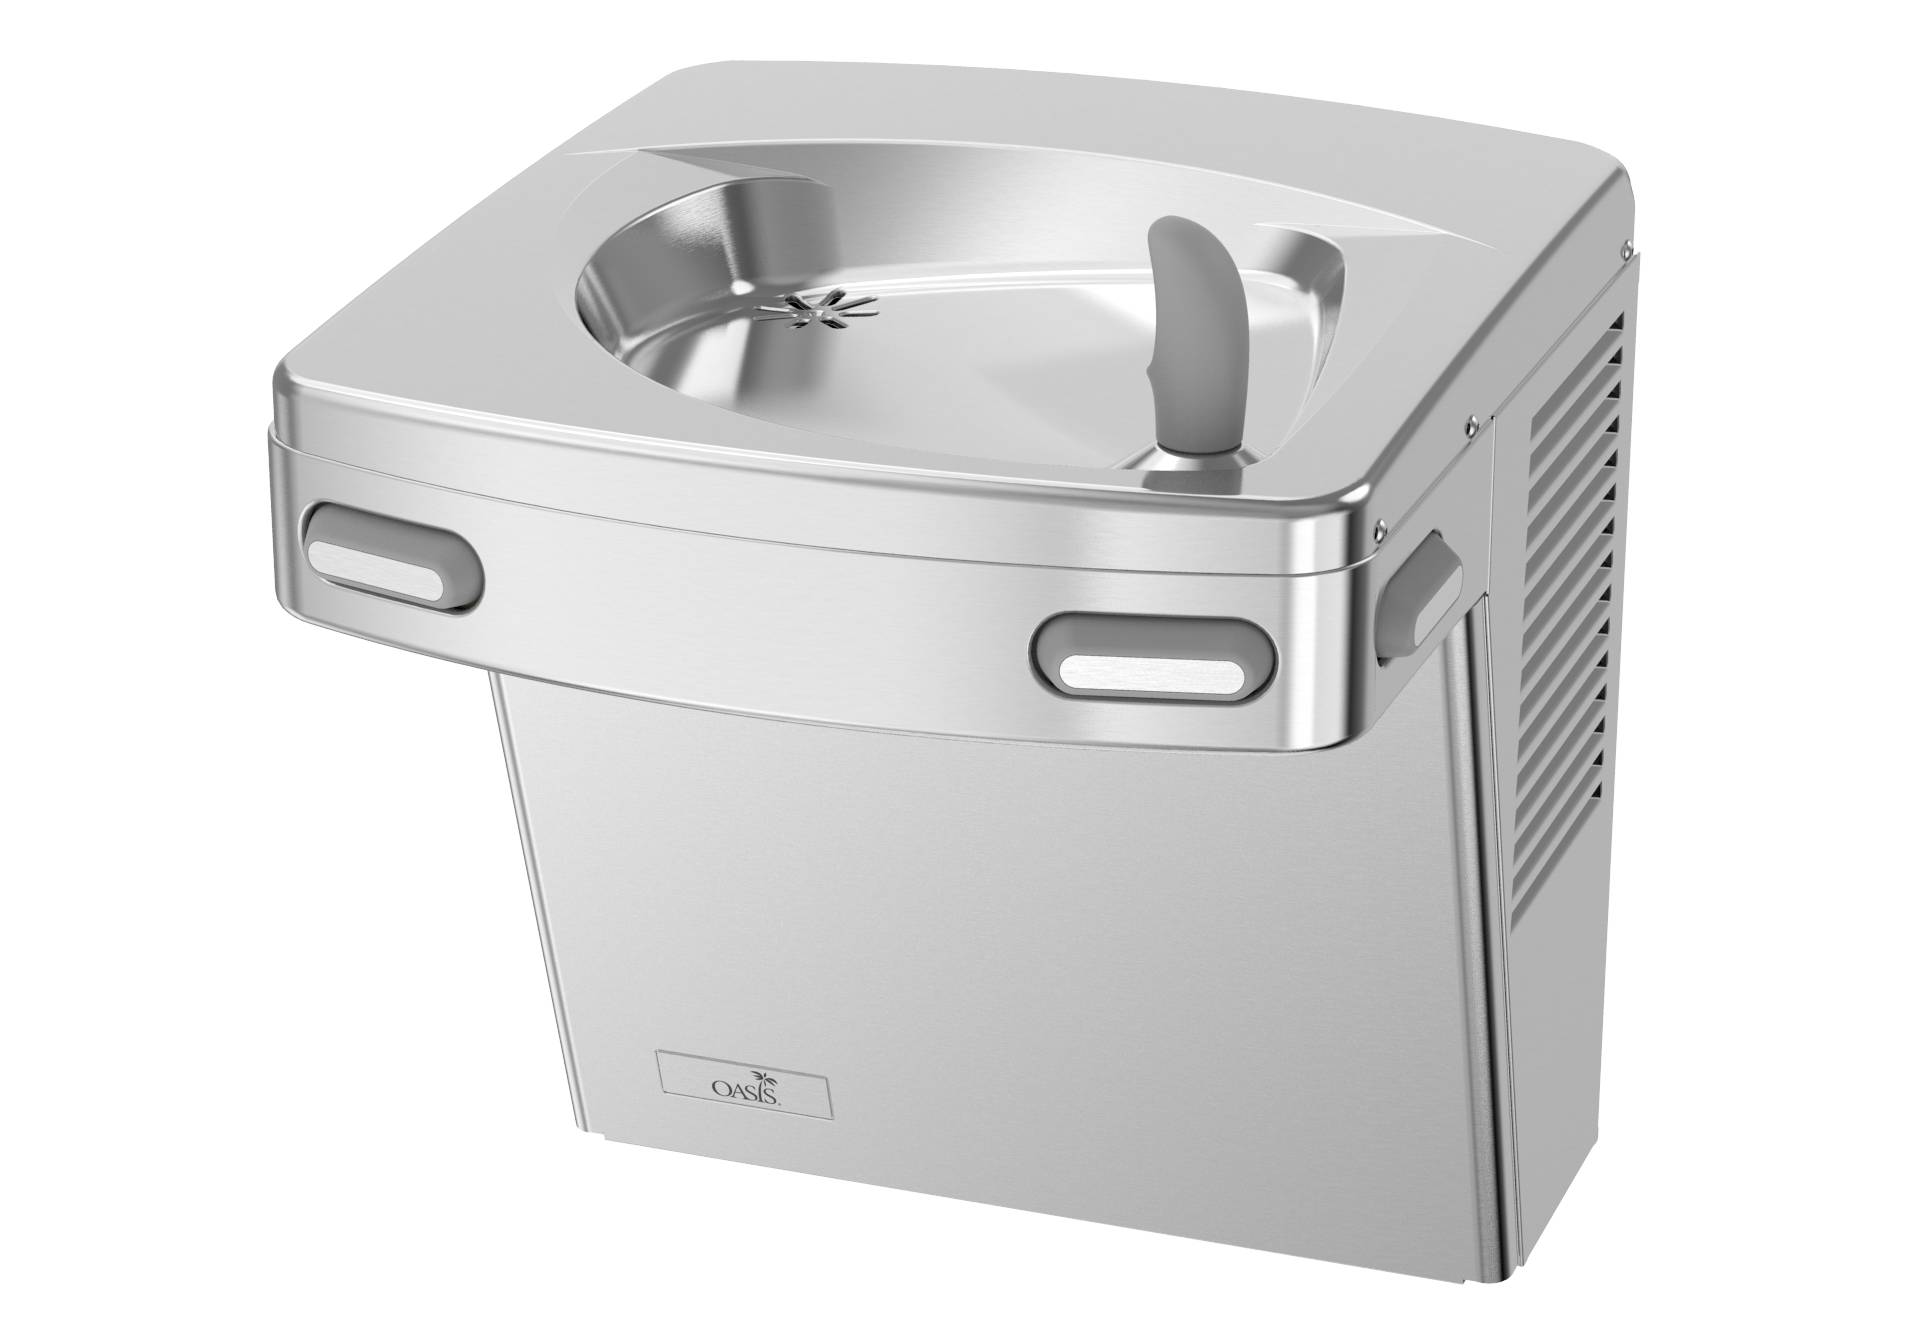 PAC Wall Mounted Manual Drinking Fountain